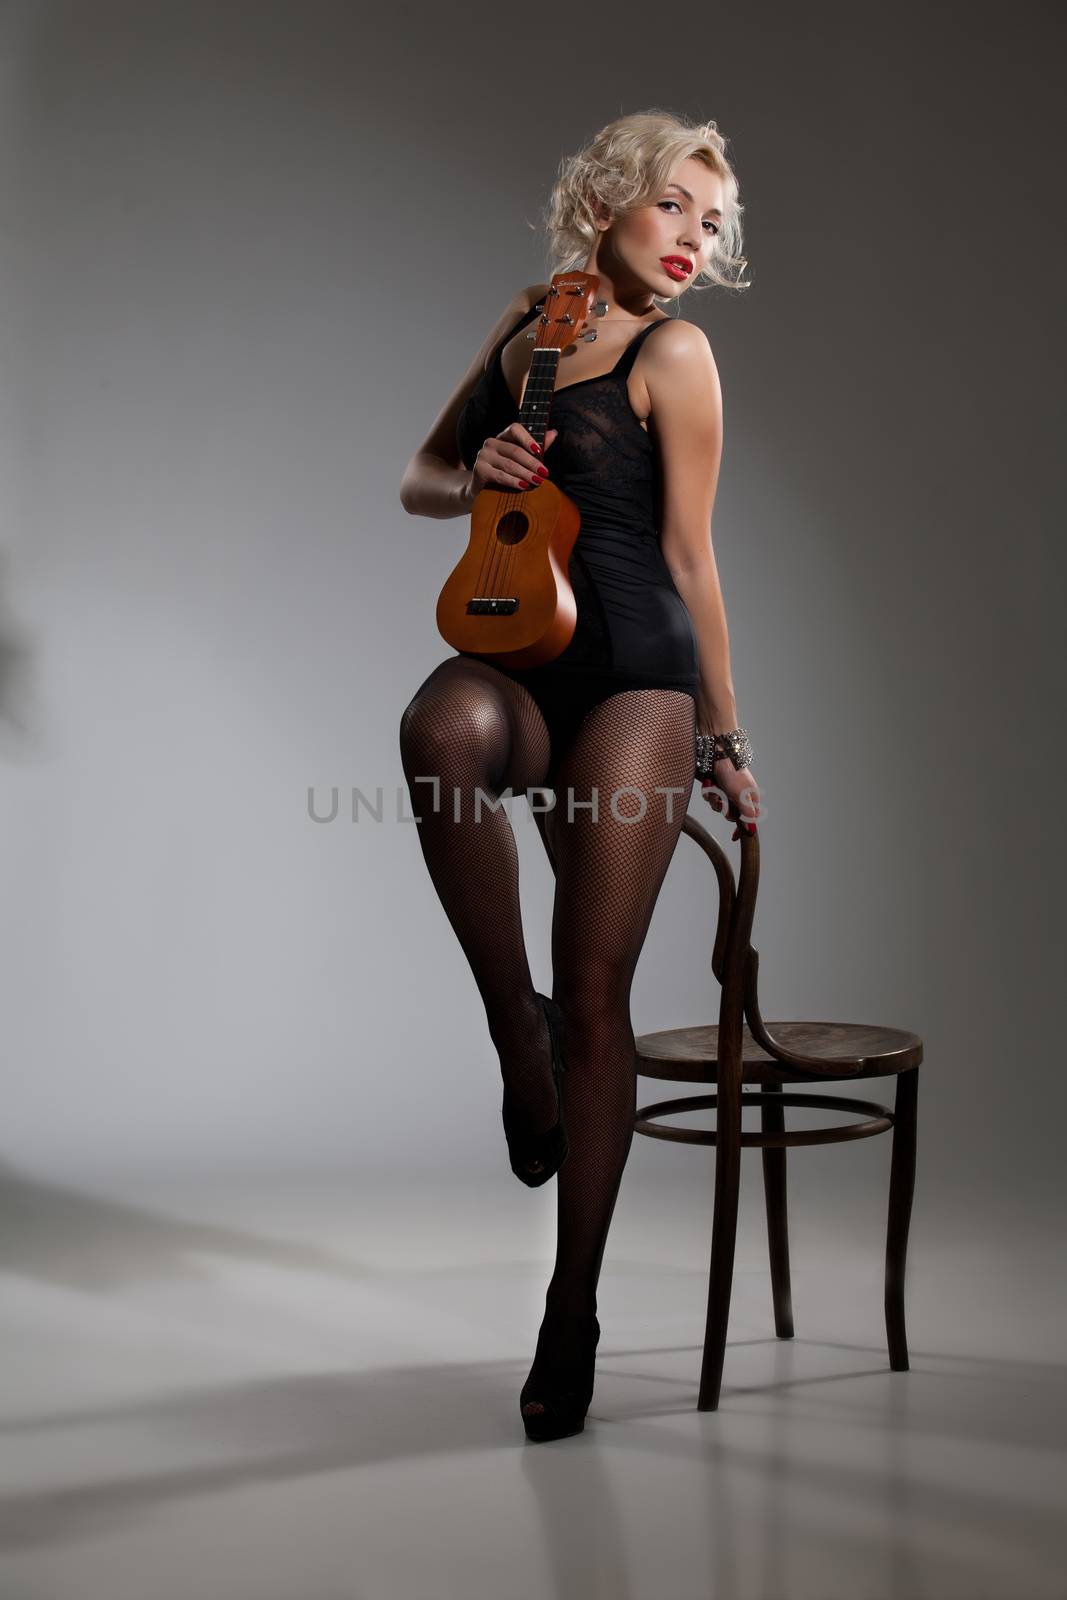 Young Woman With Ukulele by Fotoskat